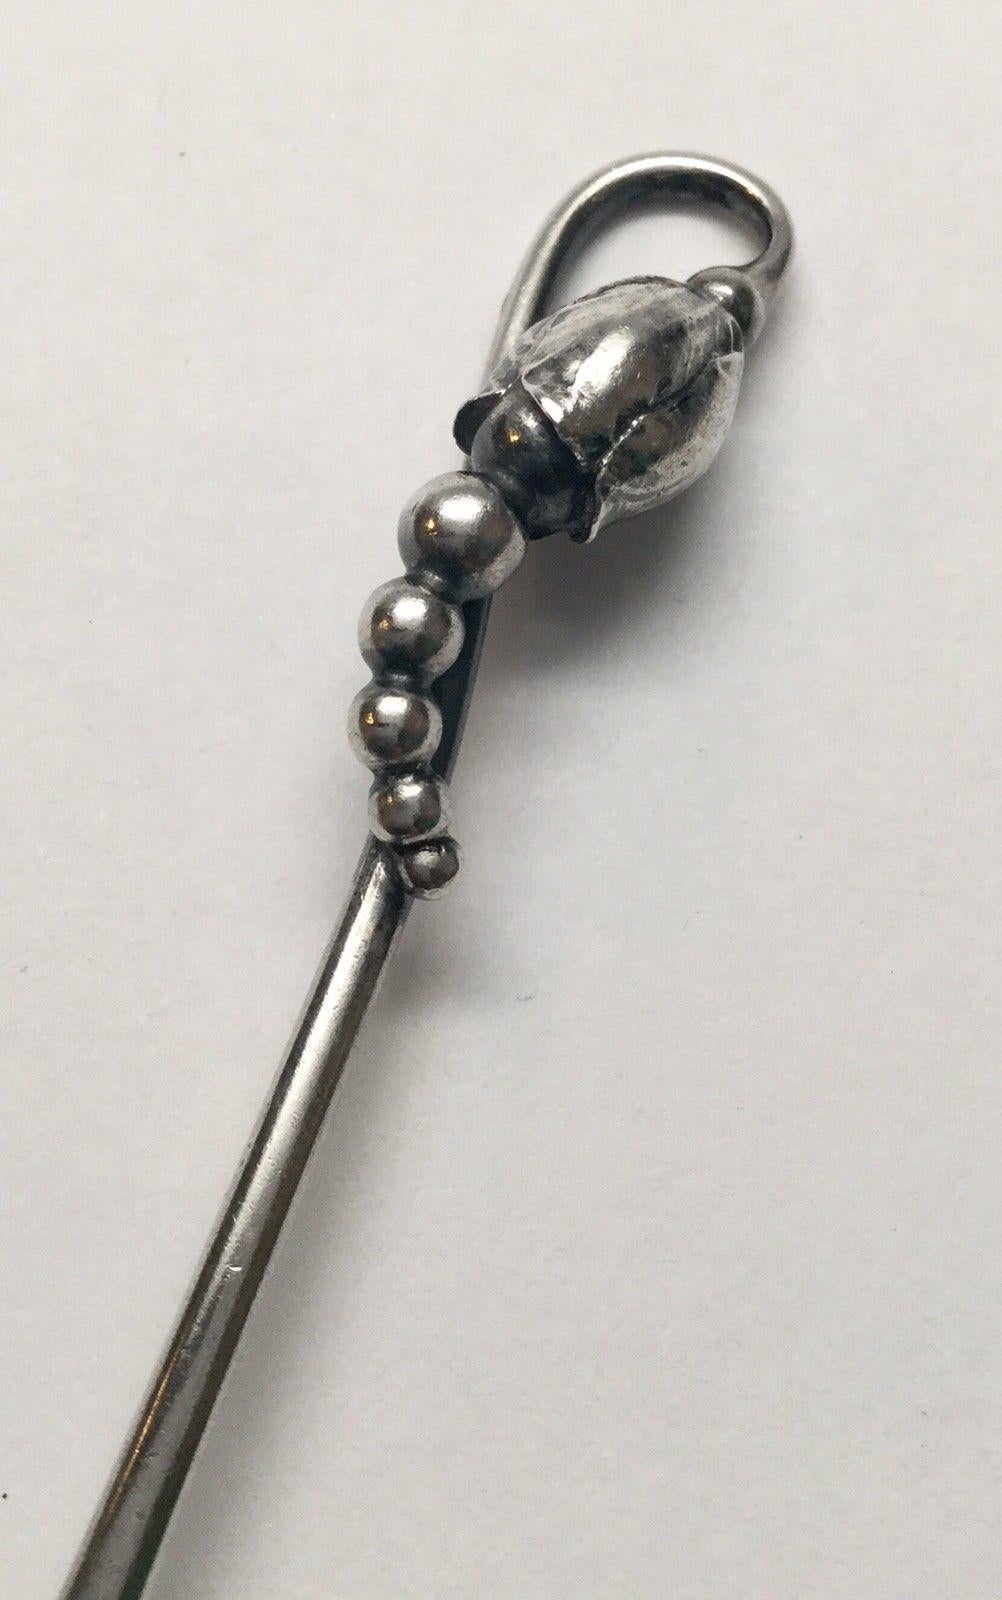 Georg Jensen Denmark hammered sterling silver coffee spoon in the blossom 84 pattern. Marked: GEORG JENSEN in dotted oval, STERLING DENMARK 84. Measures: 4 1/8